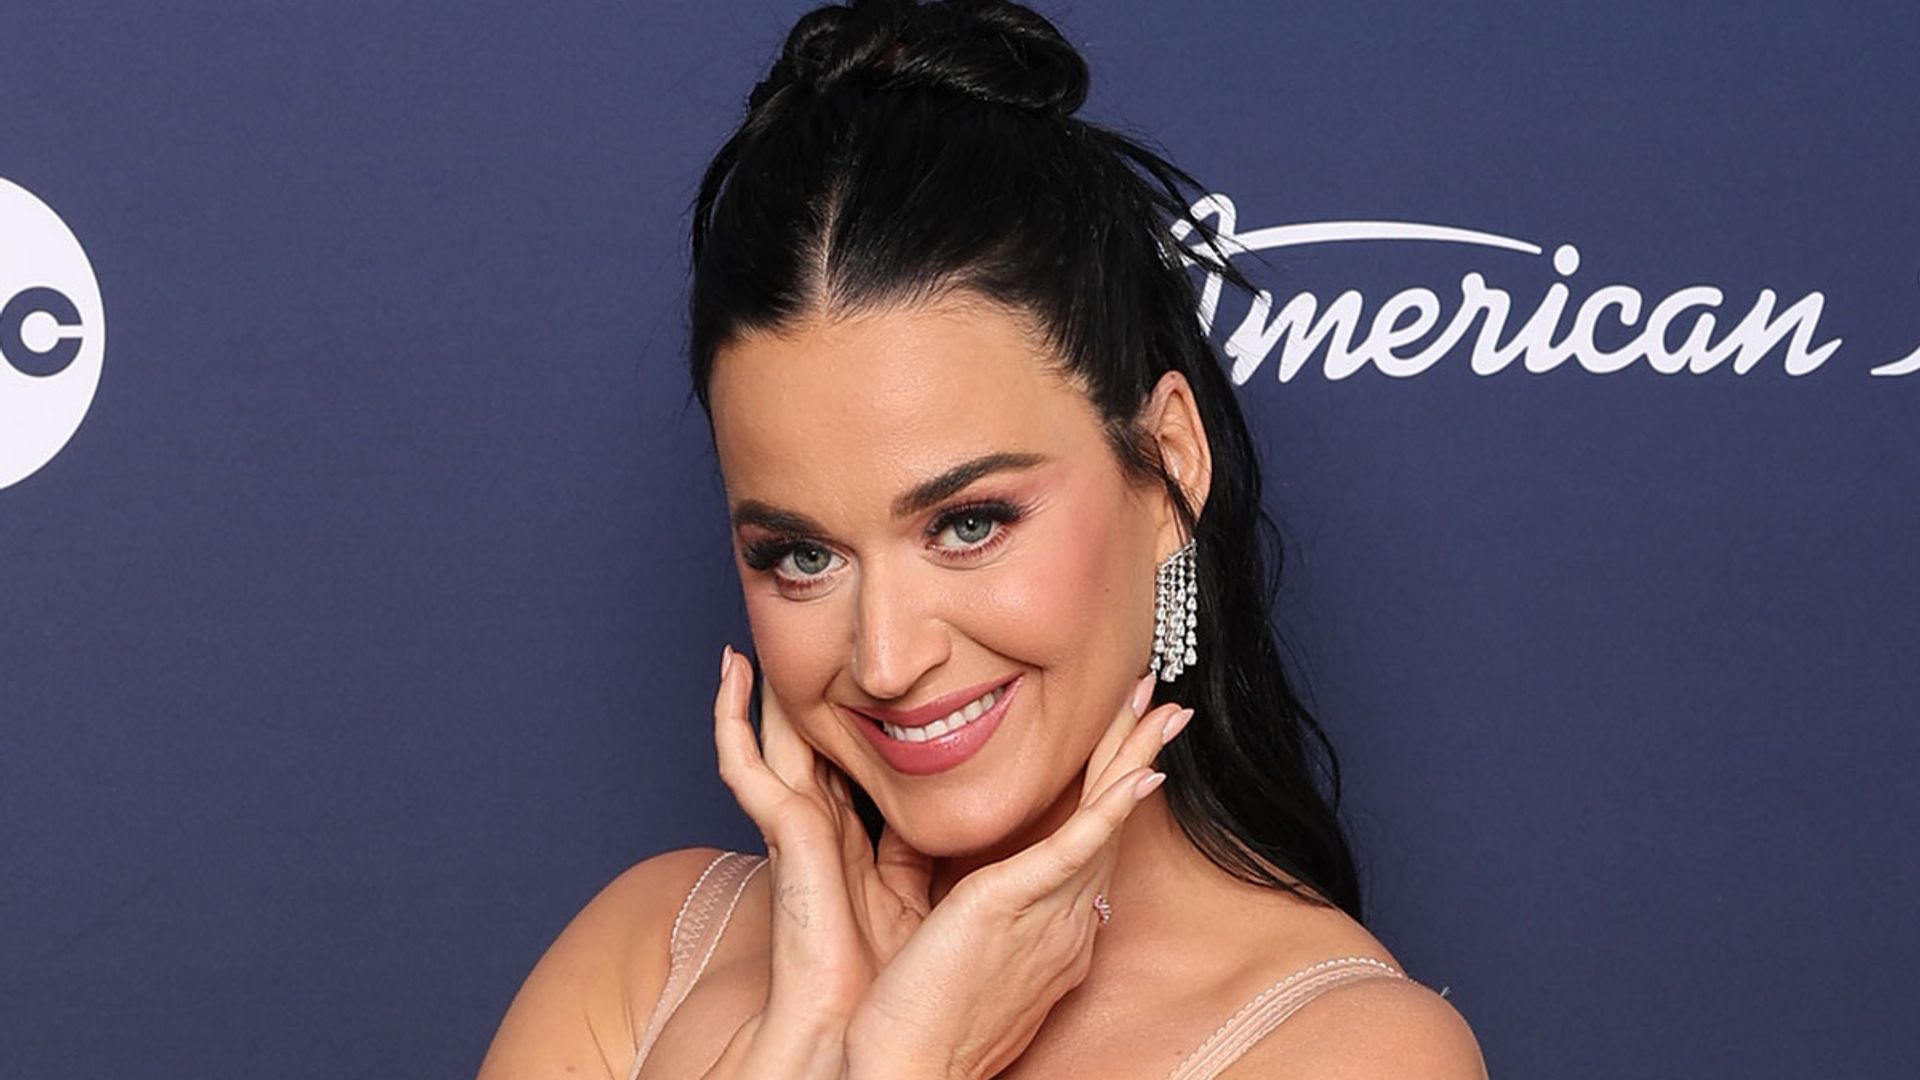 Katy Perry Shares Unexpected Picture With Rarely Seen Daughter Daisy